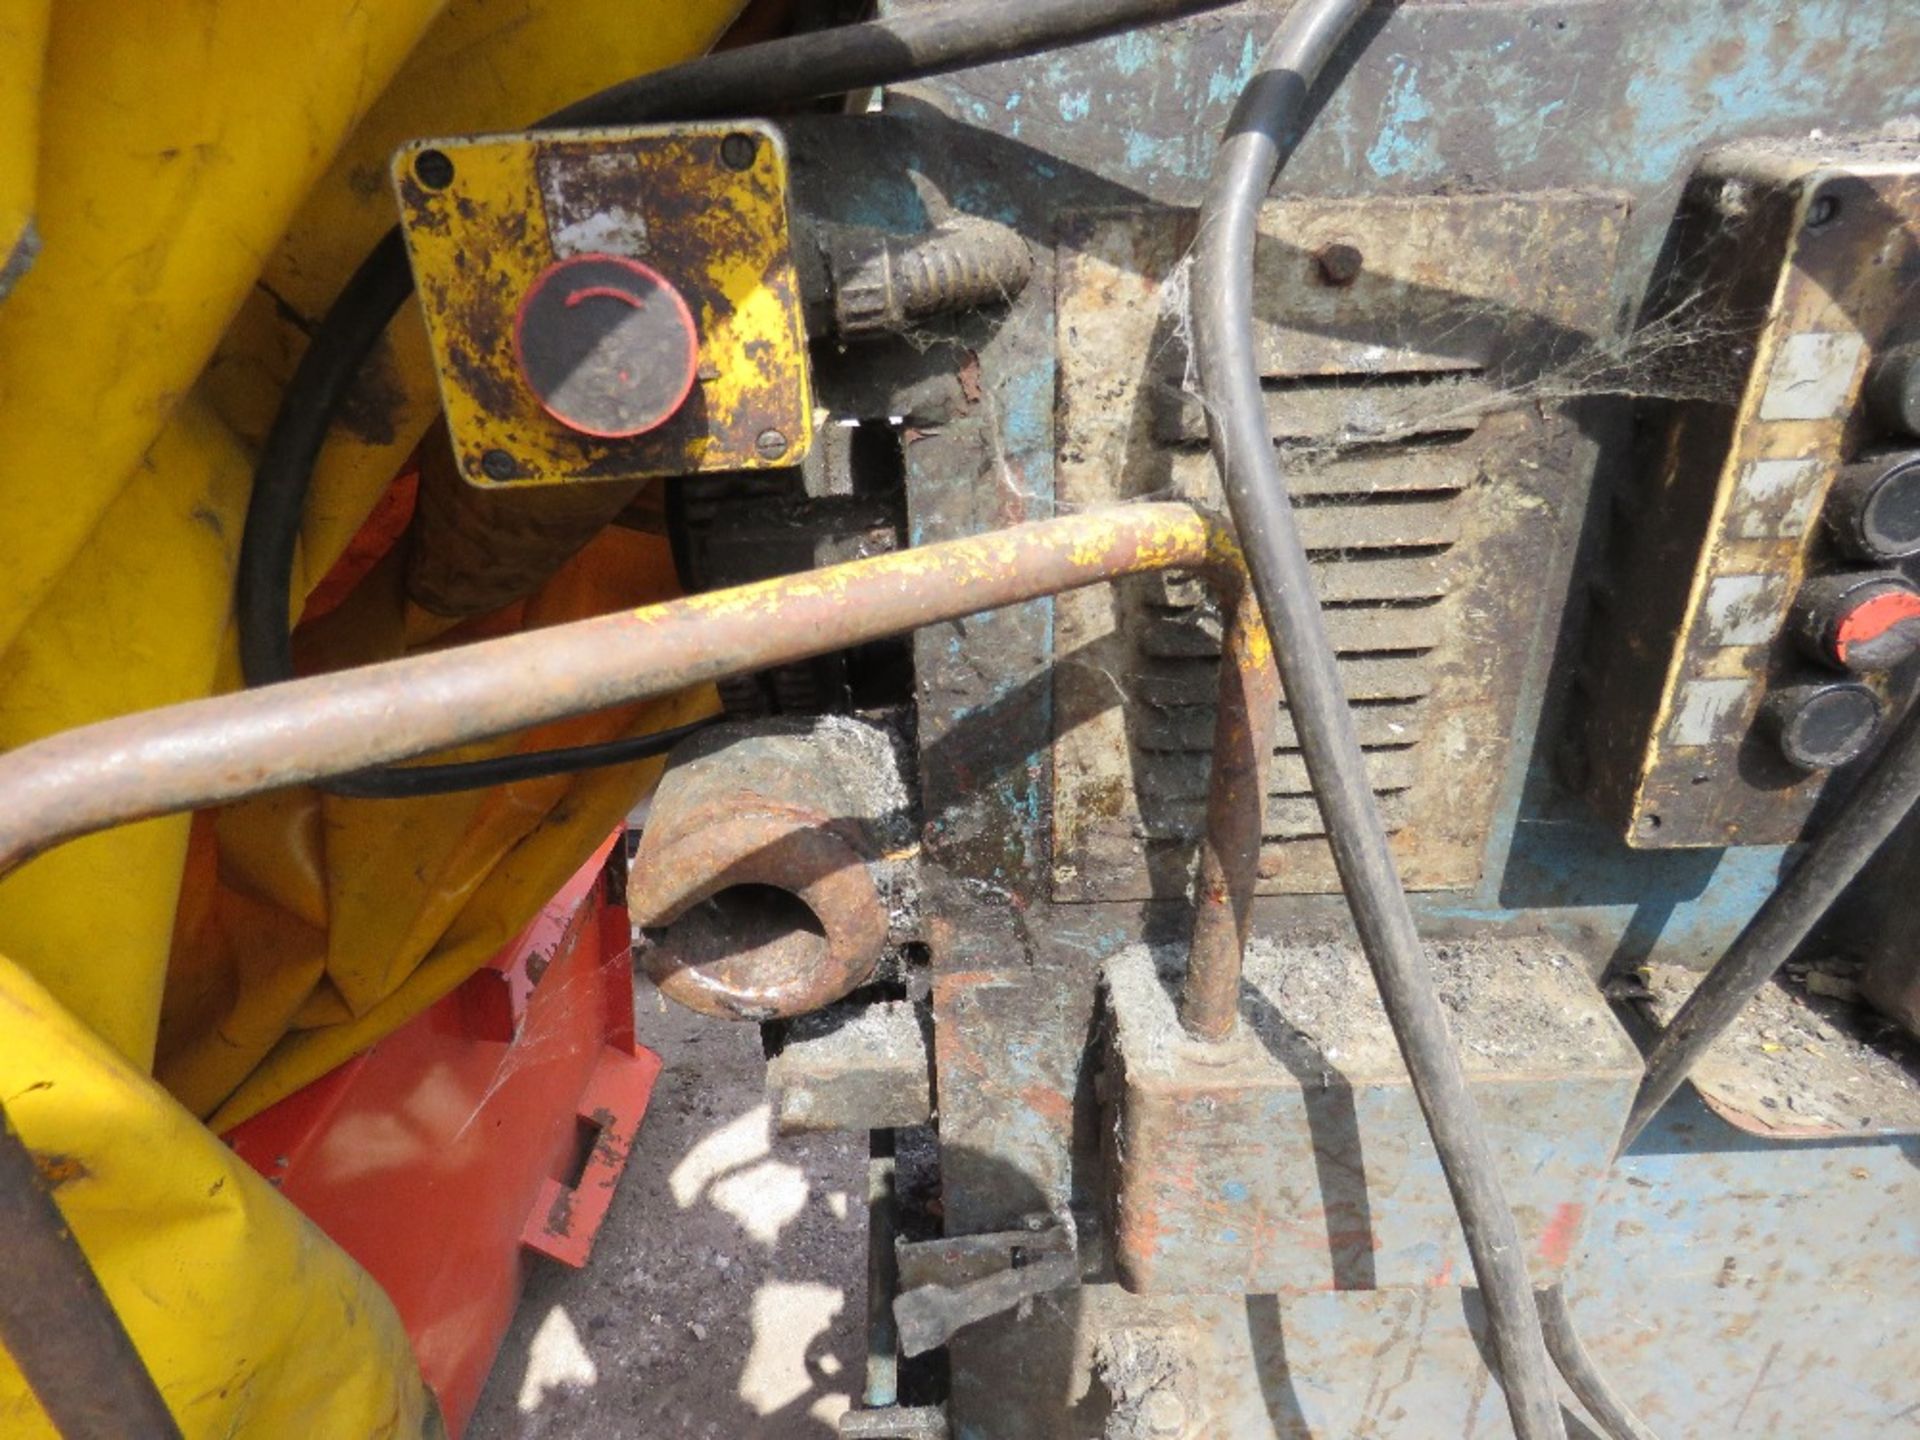 ELDAN M3 CABLE STRIPPER UNIT, 3 PHASE. WORKING WHEN REMOVED. NO VAT ON HAMMER PRICE. - Image 6 of 6